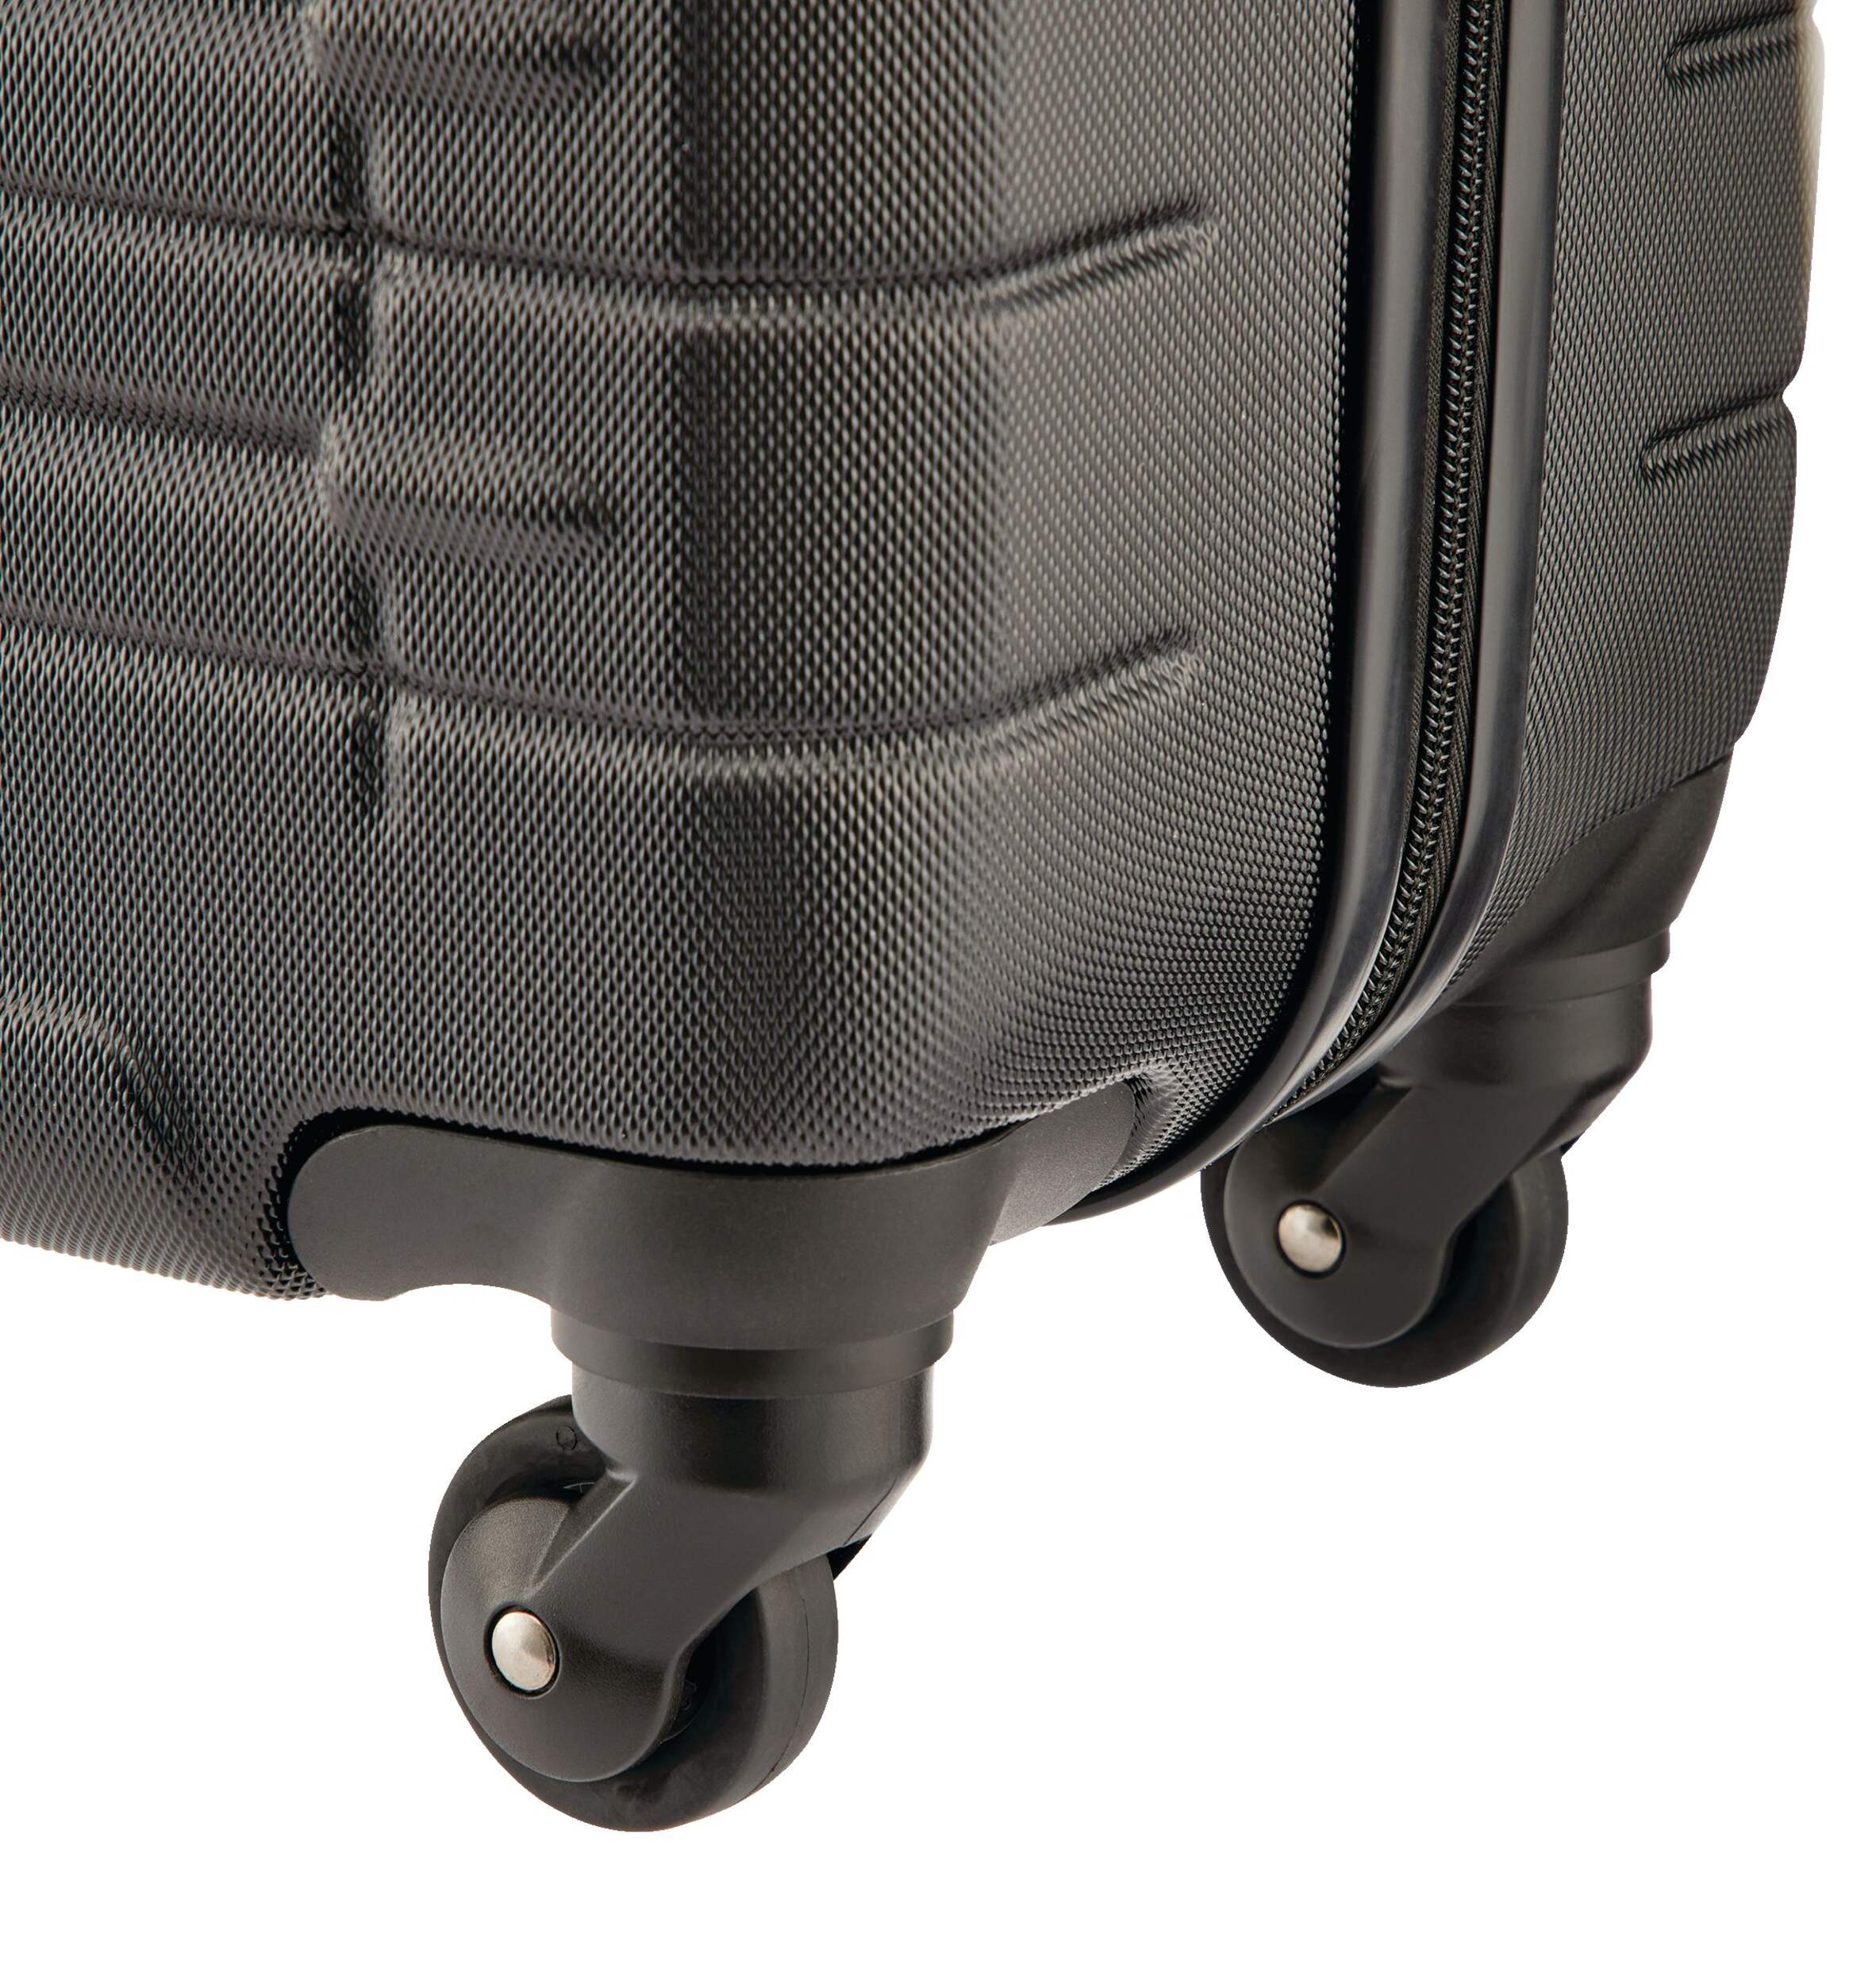 Outbound Hardside Spinner Wheel Carry-On Travel Luggage Suitcase, Black ...